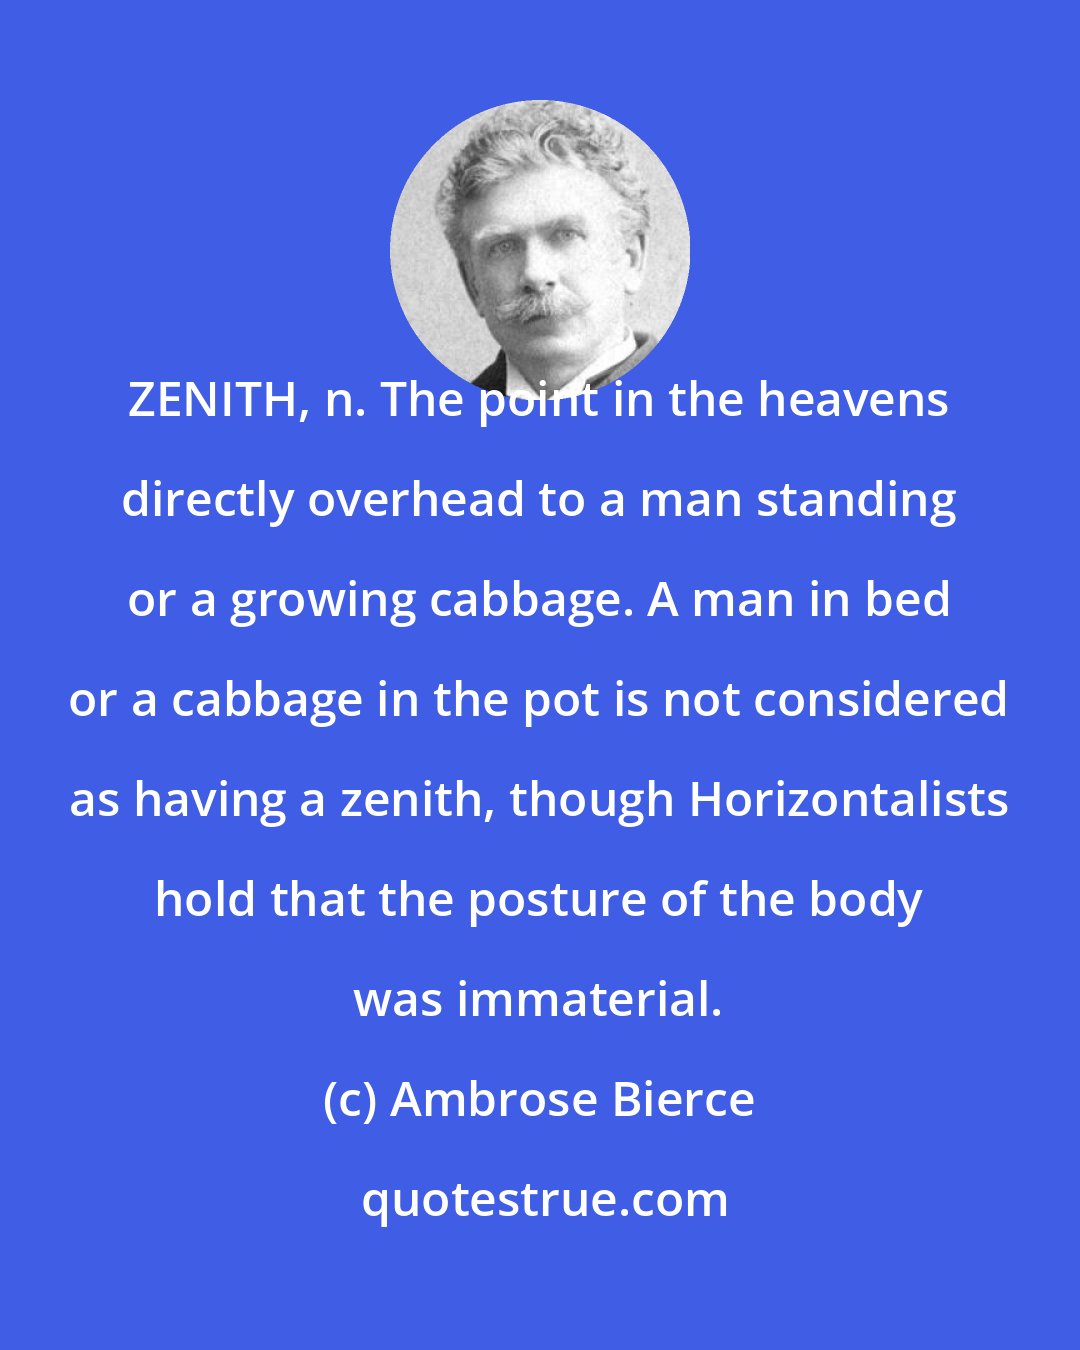 Ambrose Bierce: ZENITH, n. The point in the heavens directly overhead to a man standing or a growing cabbage. A man in bed or a cabbage in the pot is not considered as having a zenith, though Horizontalists hold that the posture of the body was immaterial.